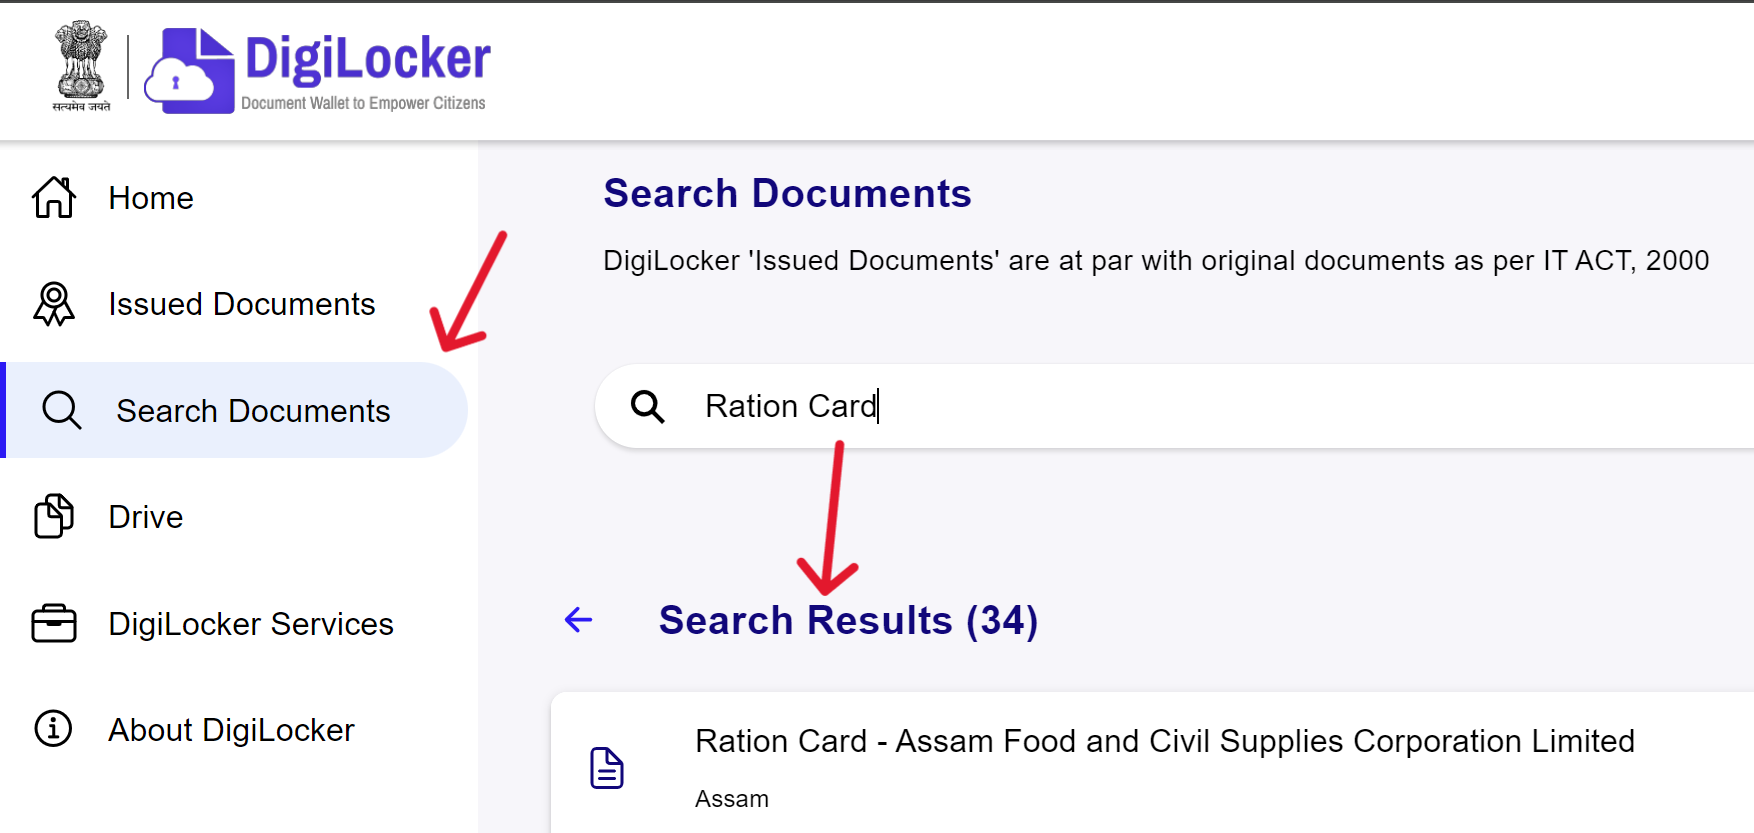 Search For Ration Card In DigiLocker